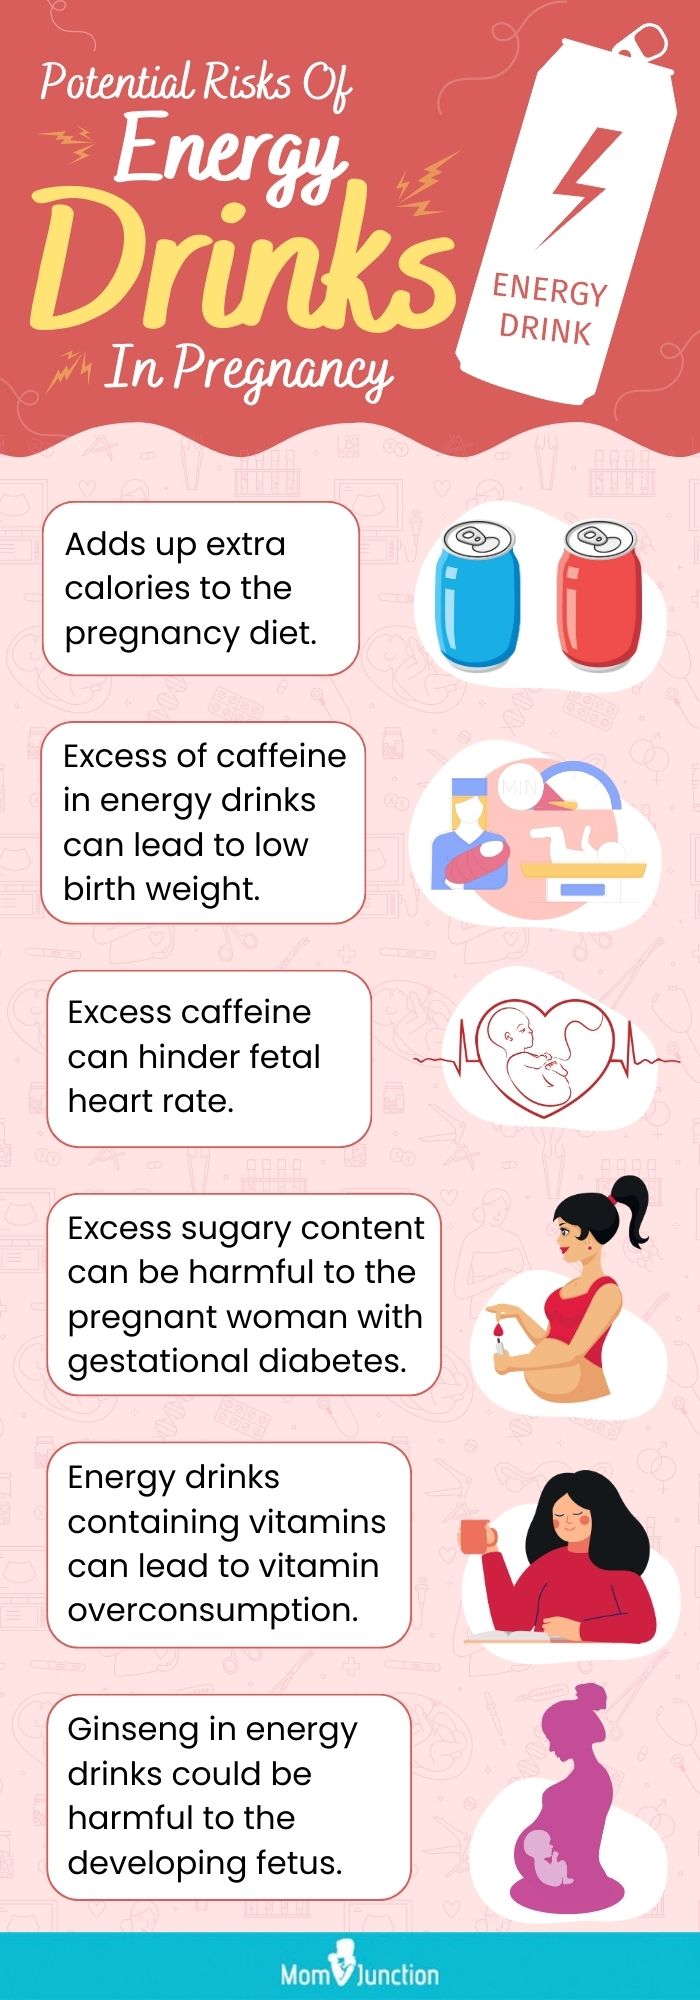 potential risks of energy drinks in pregnancy (infographic)